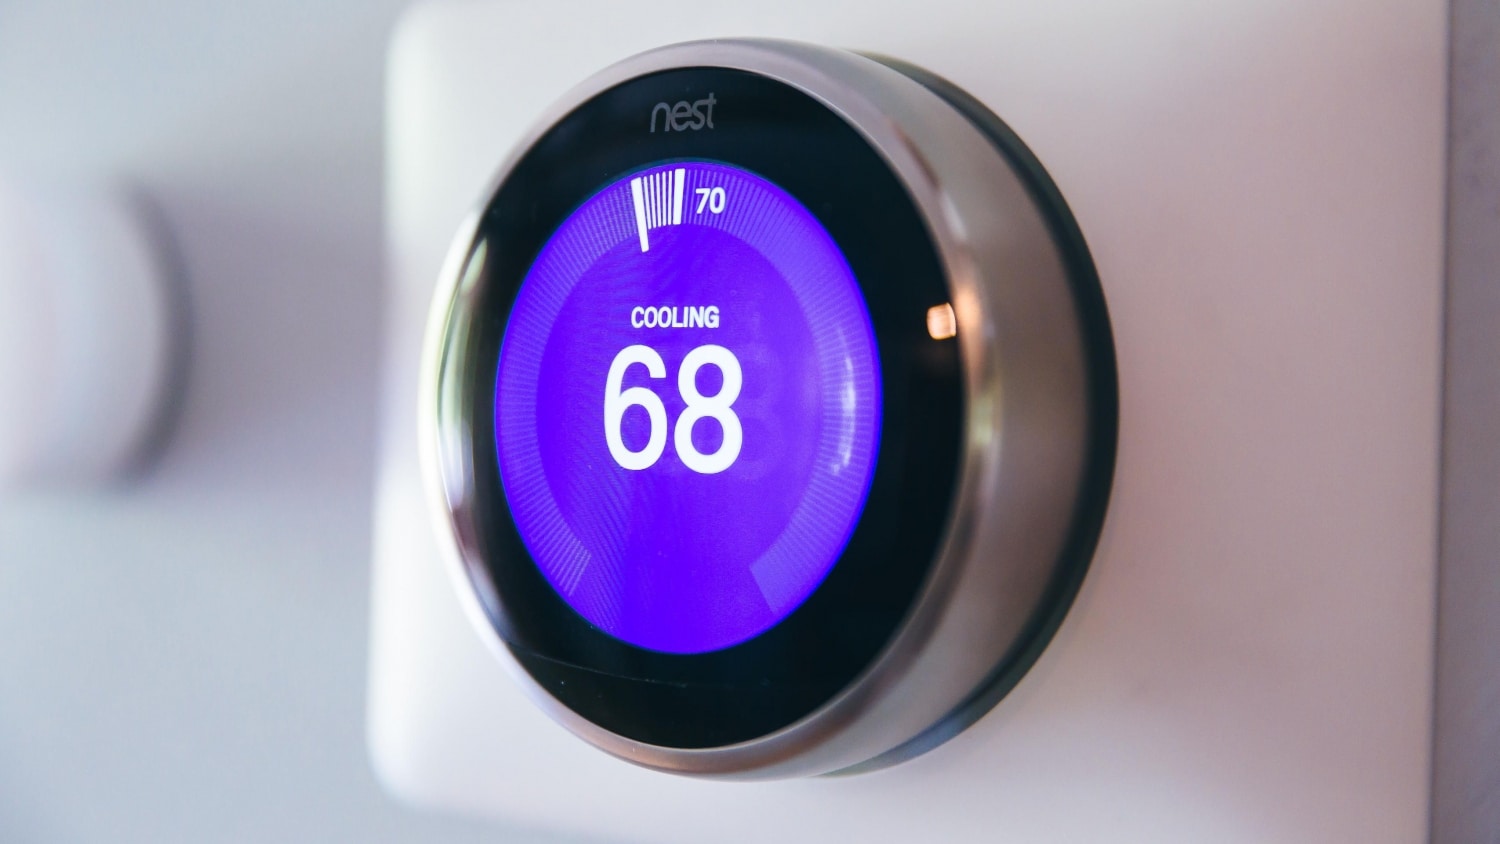 Nest thermostat installed by CIA